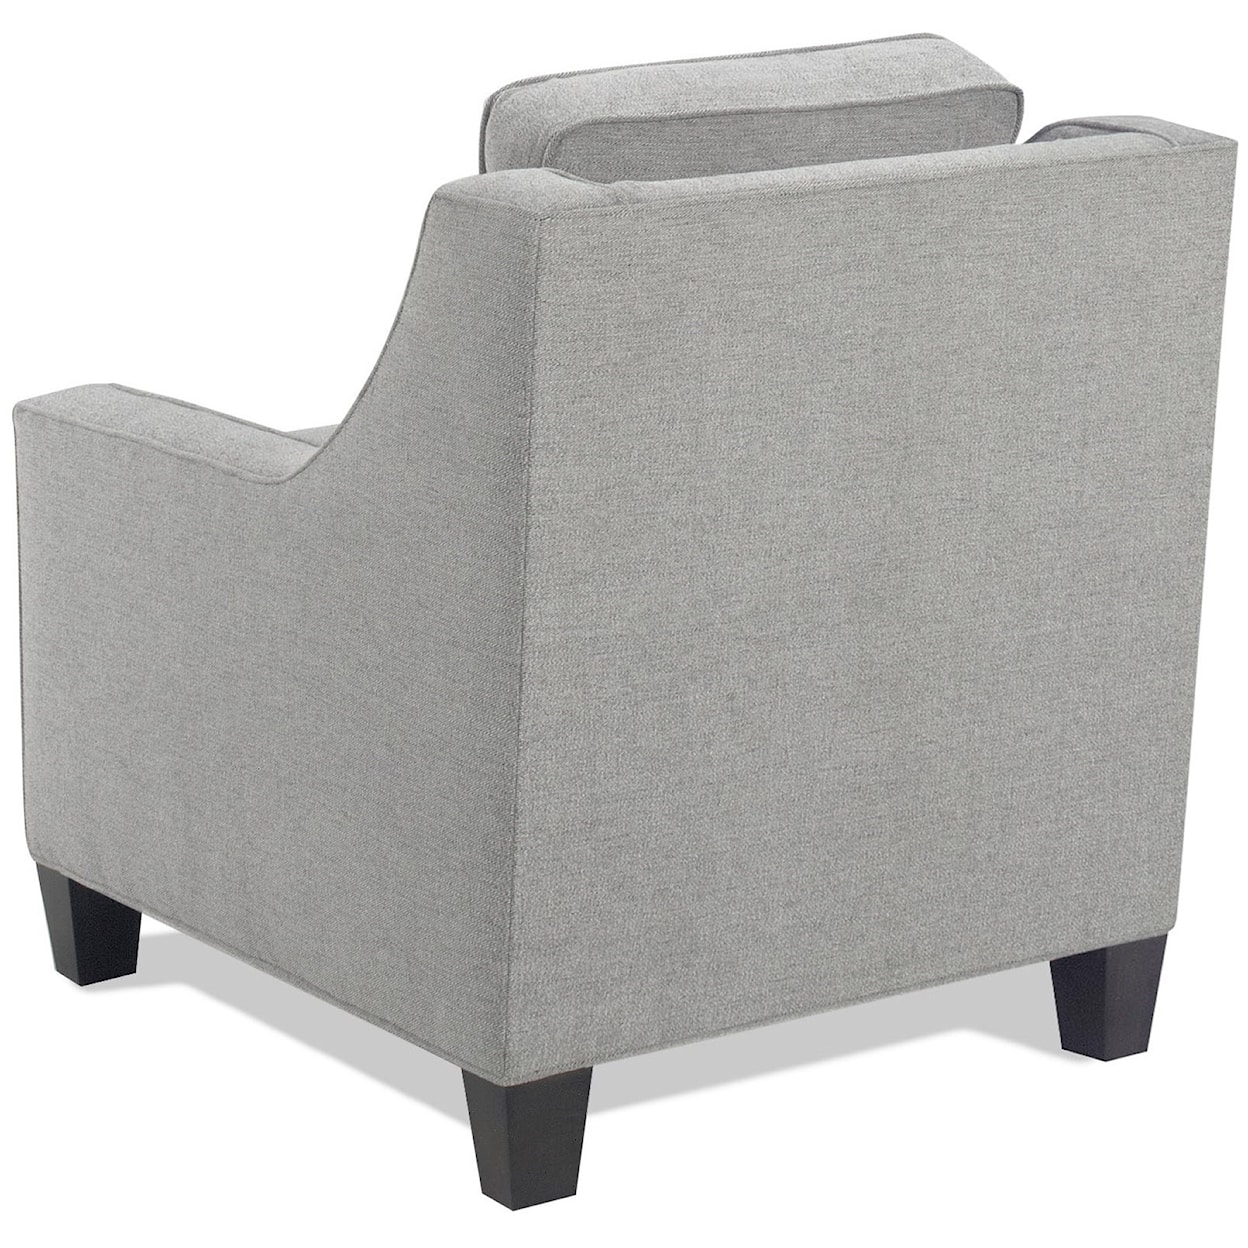 Temple Furniture Brody Chair